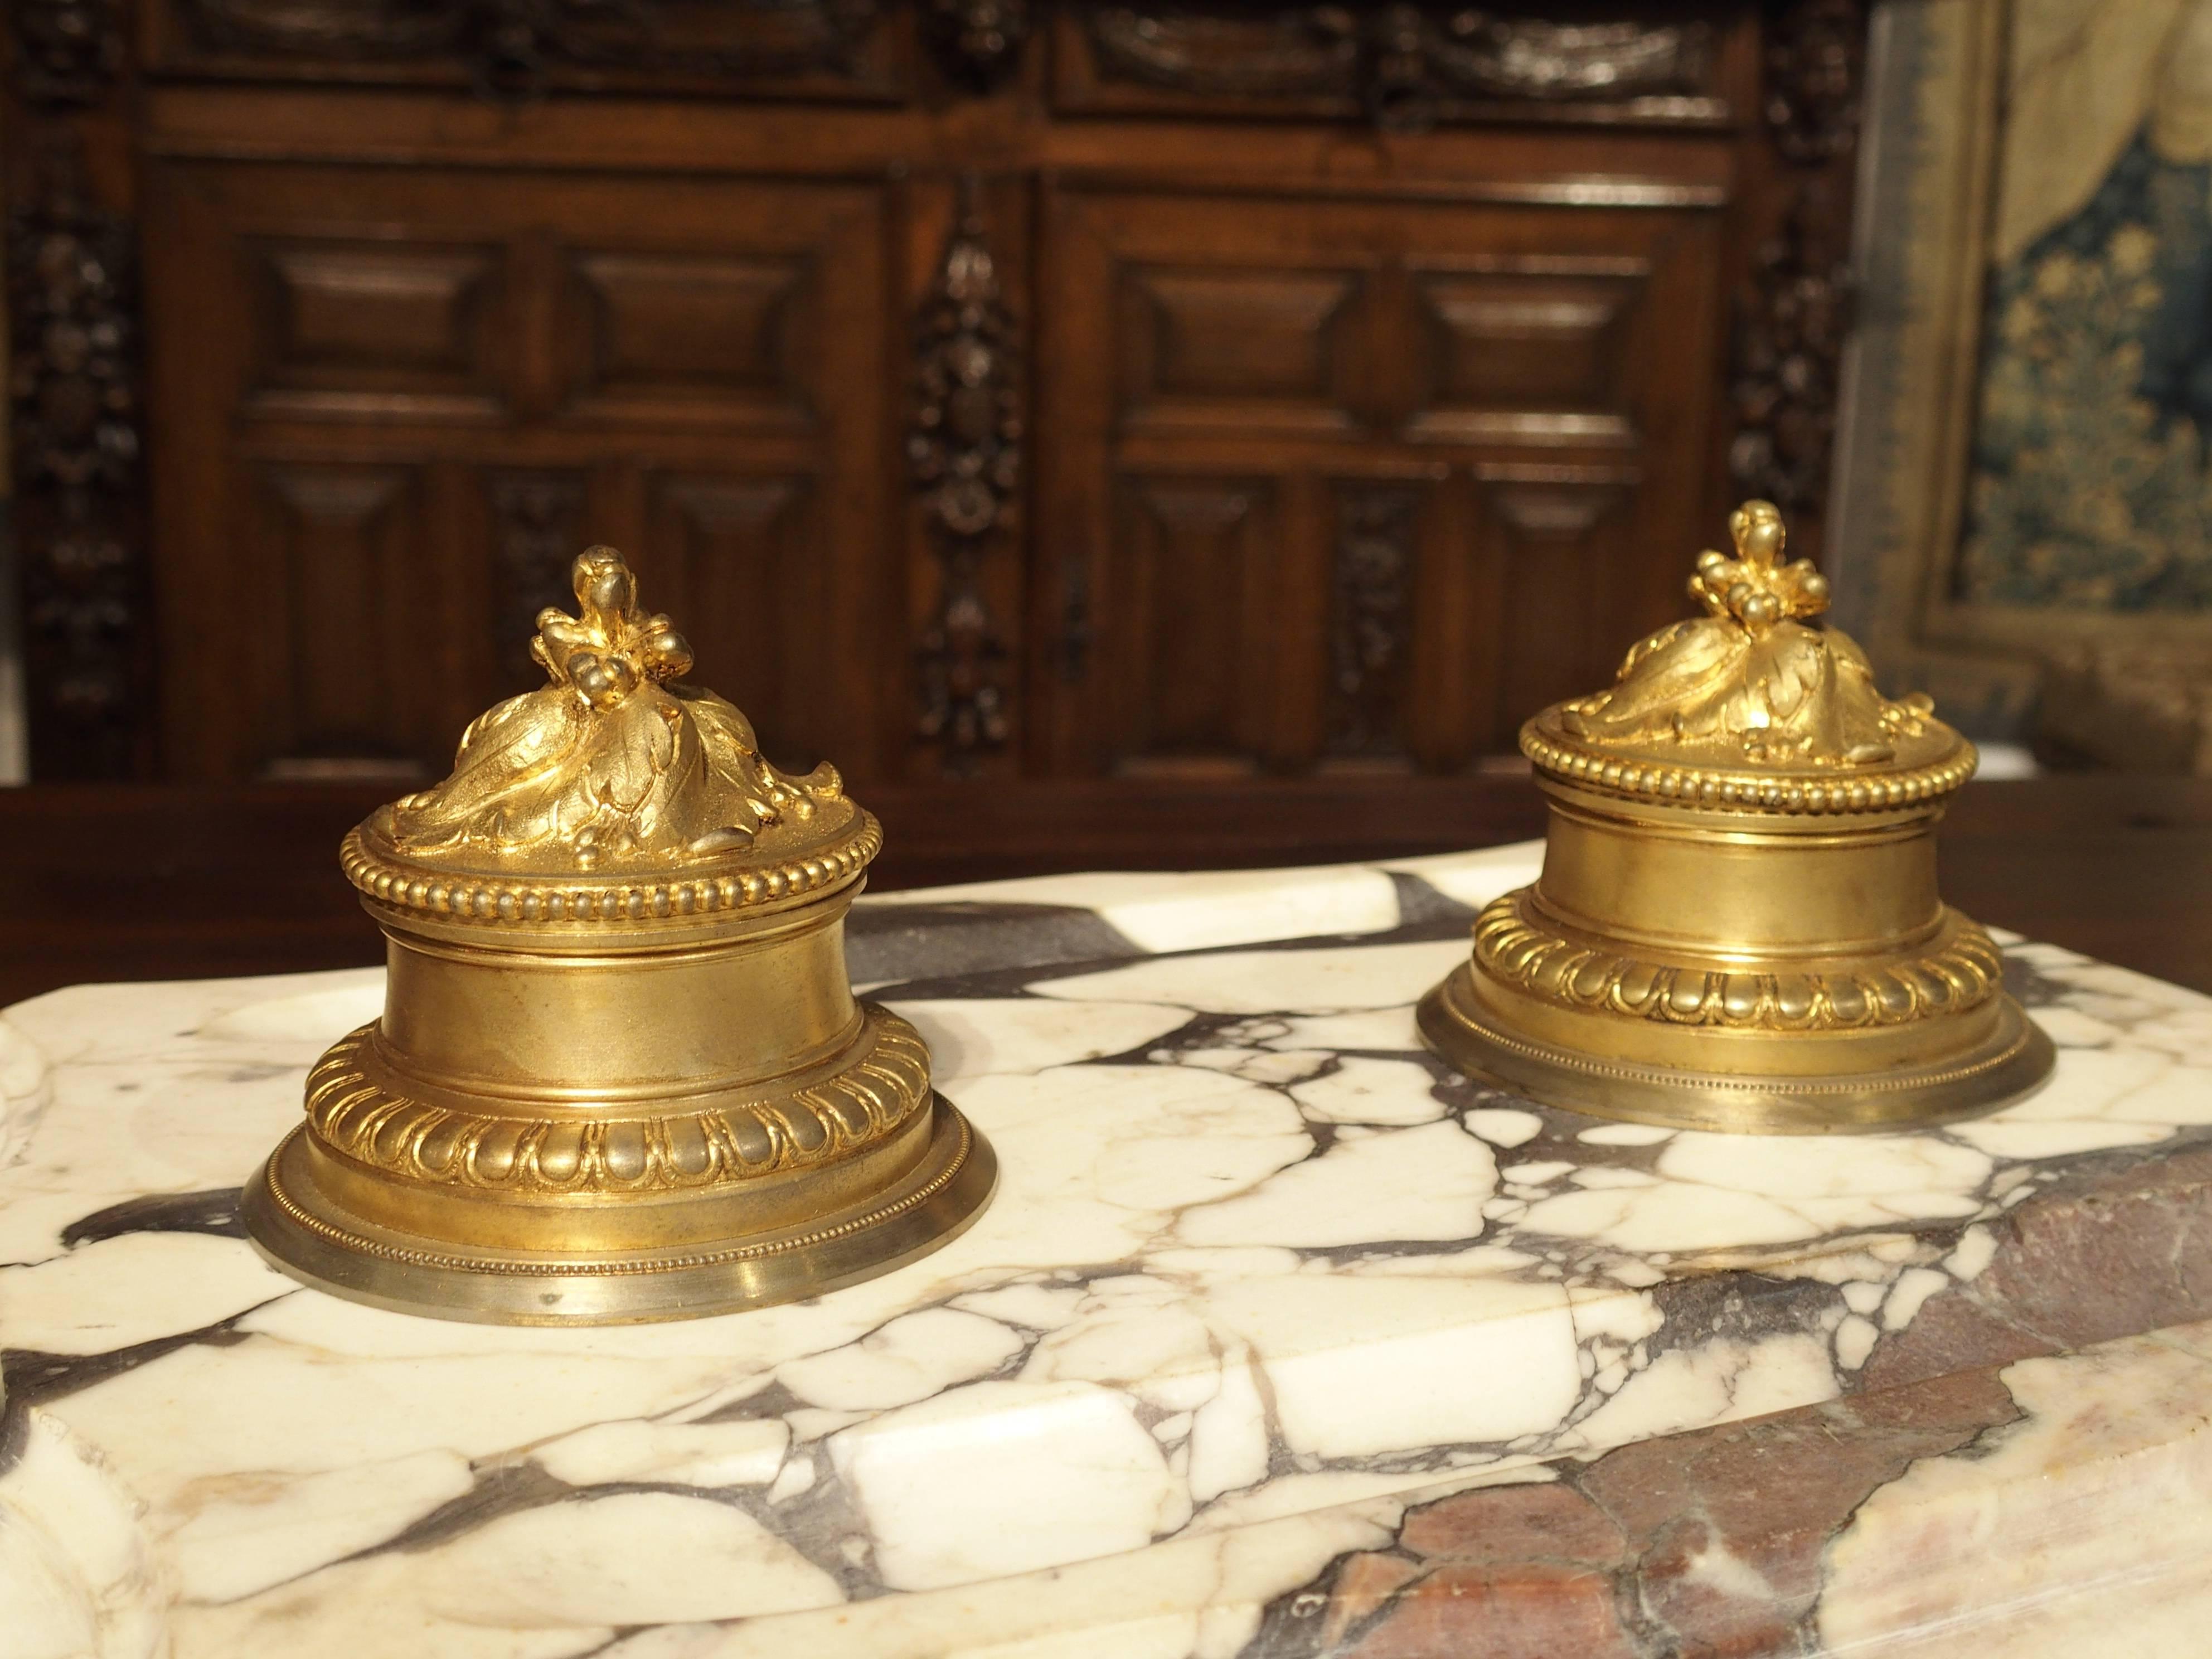 This is a stunning, large, antique French marble and gilt bronze double inkwell. The inkwells’ lids are hinged to the wells and have motifs of swirling leaves with berries culminating at the top for the pull. The other motifs are varying sizes of